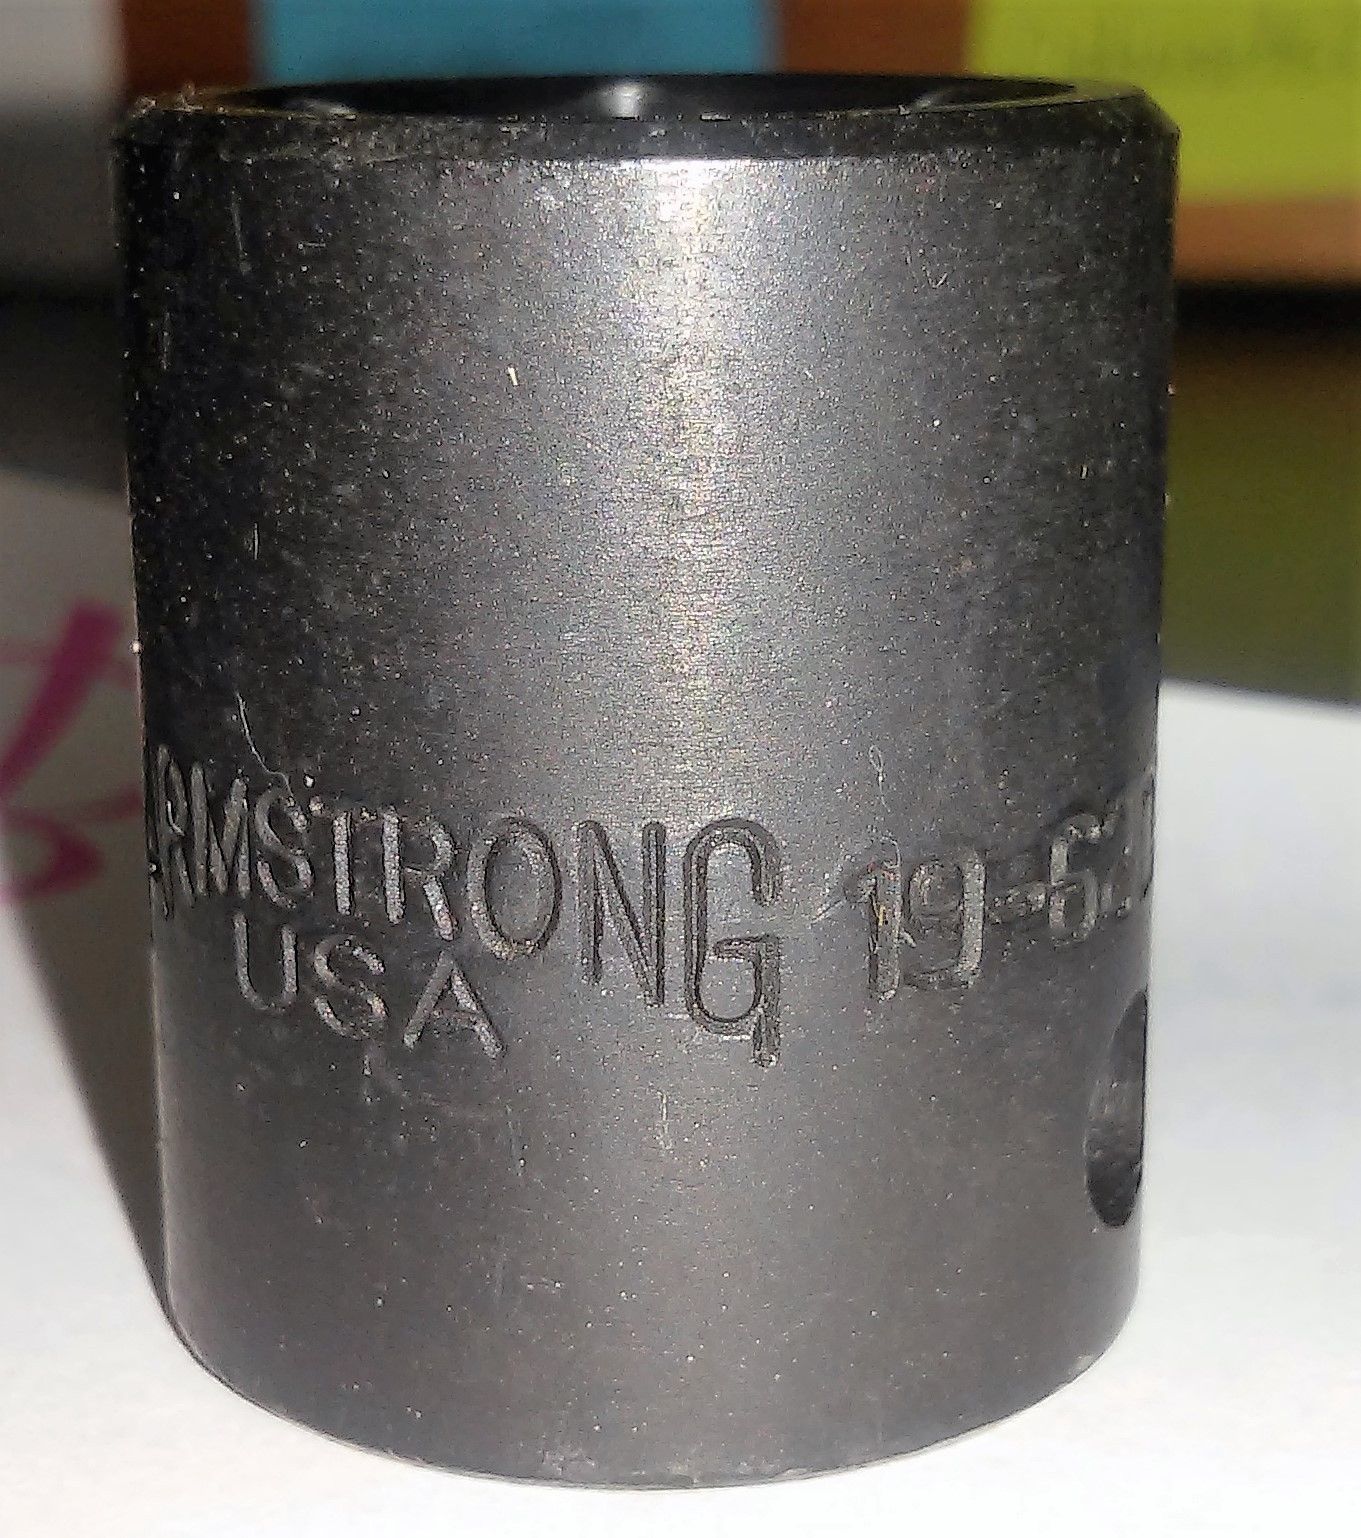 Armstrong 19-620A 3/8" Drive 6 Point Impact Socket 5/8" USA